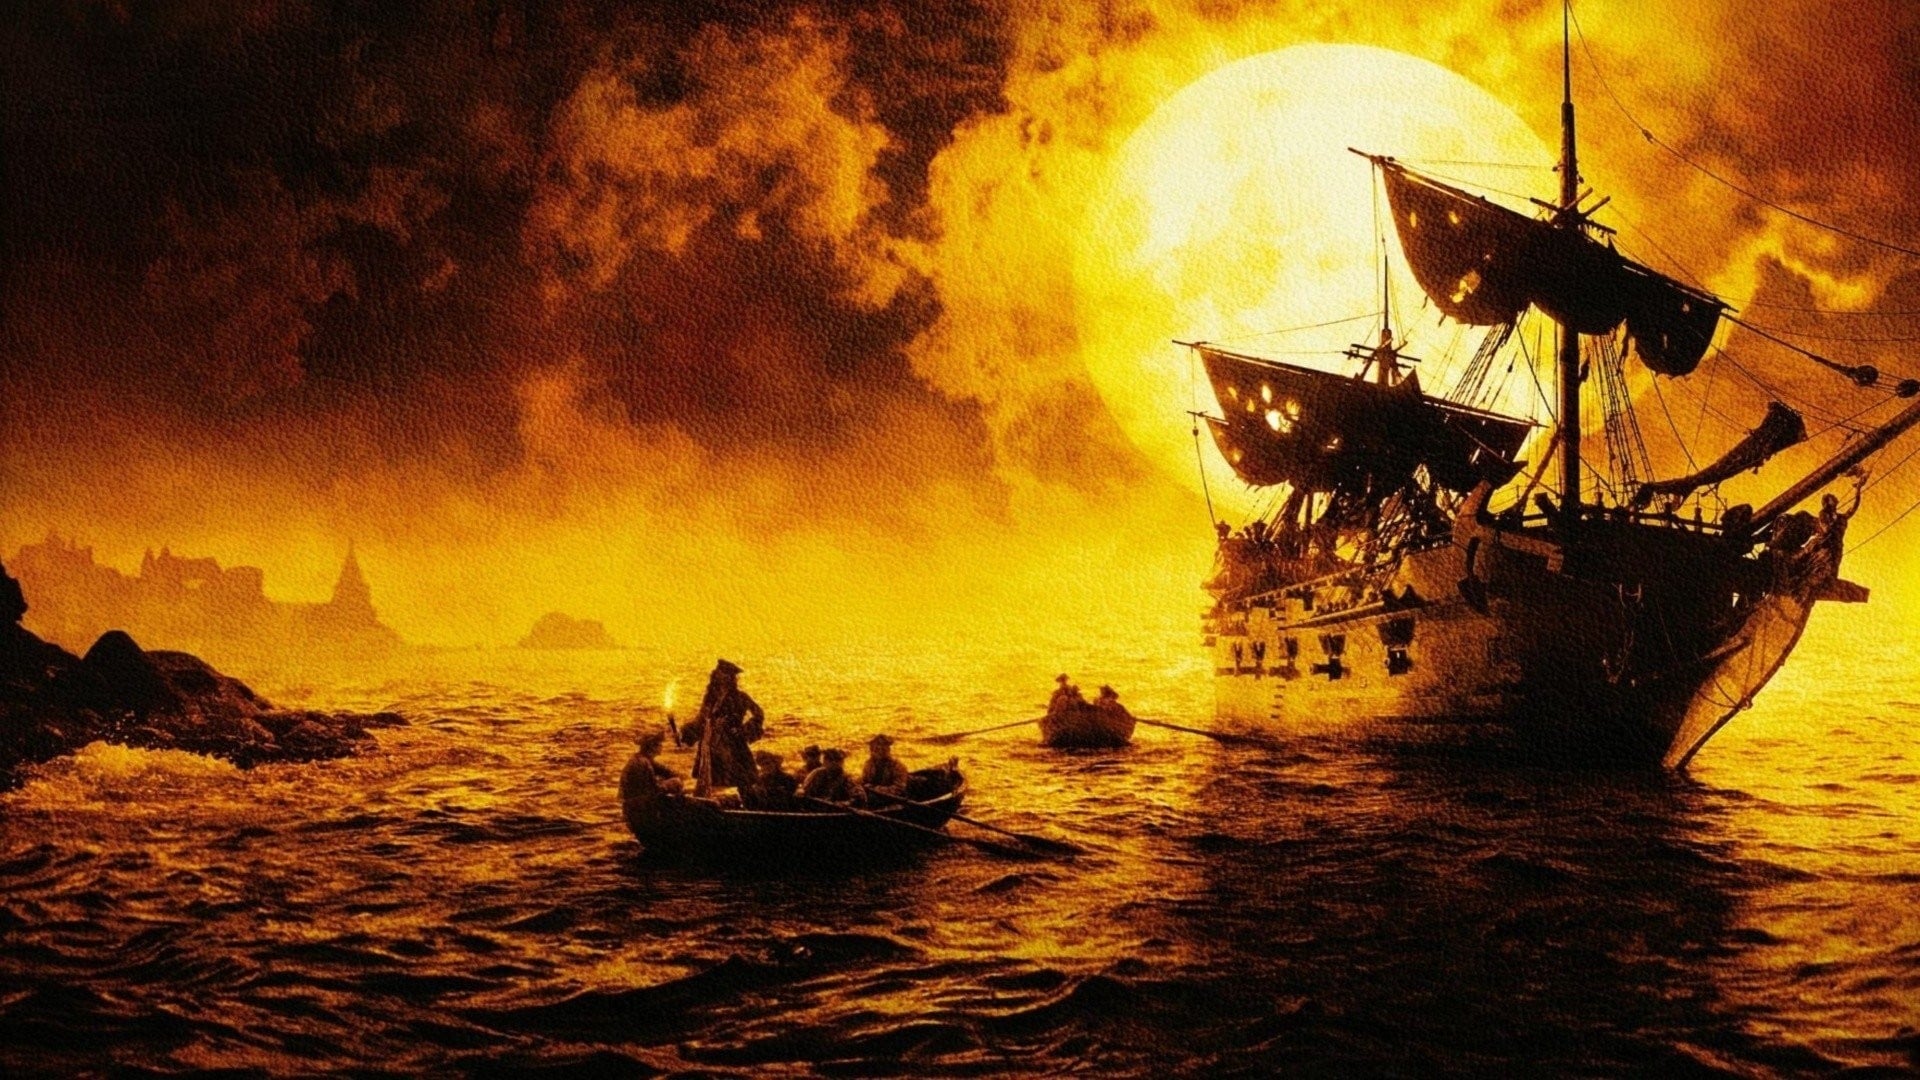 Pirates of the Caribbean: The Curse of the Black Pearl 2003 123movies